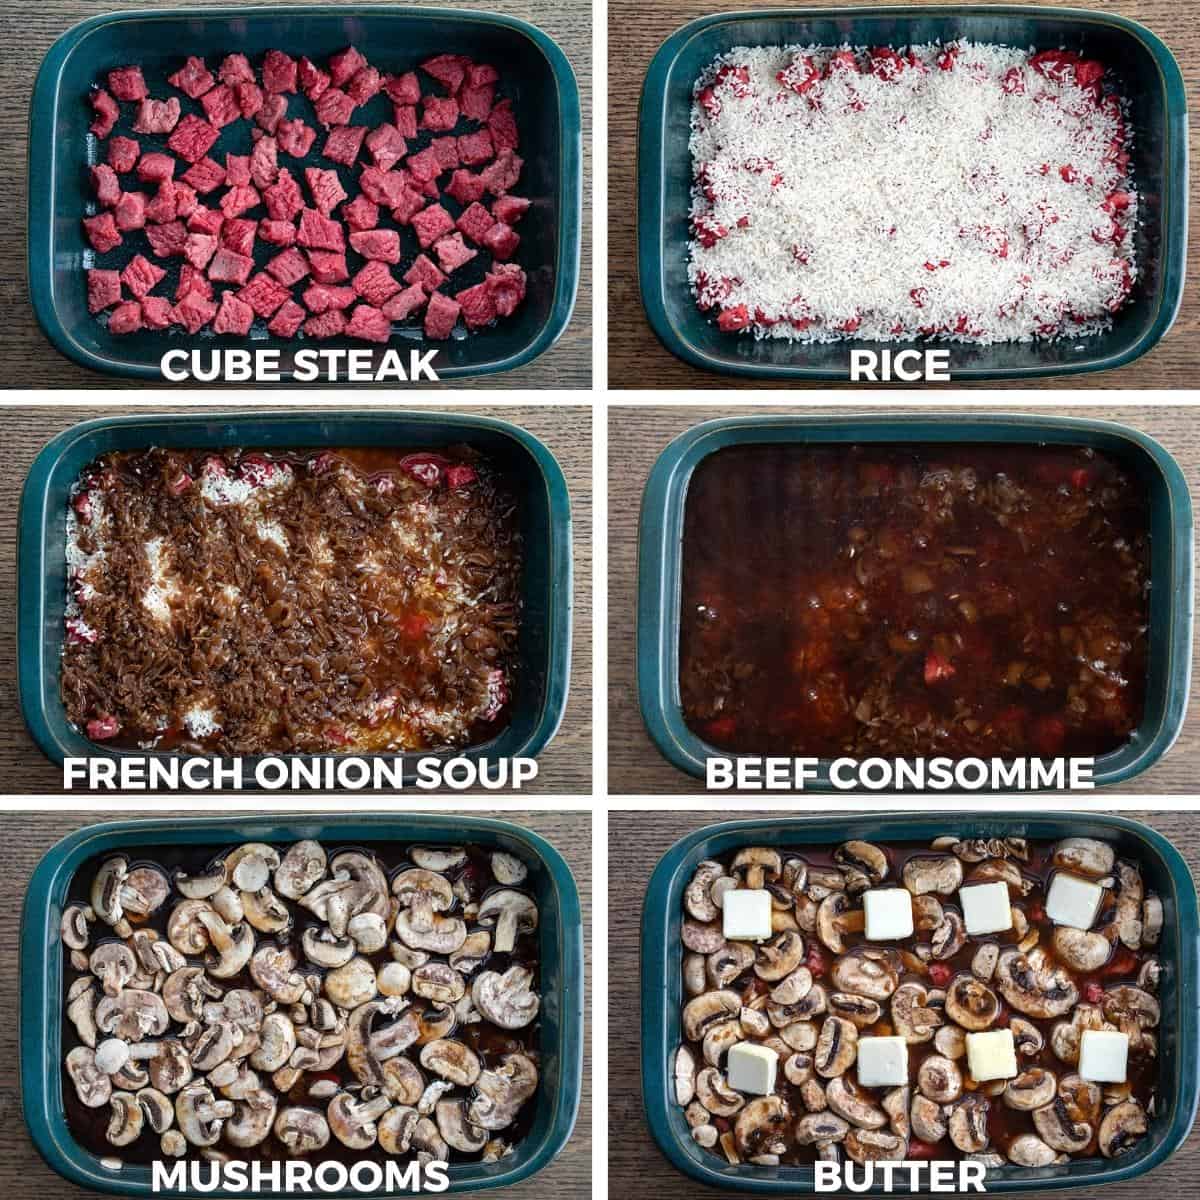 Steps for Making Cube Steak Mushroom Casserole with Cube Steak, Rice, Soup Consomme, mushrooms, and Butter.